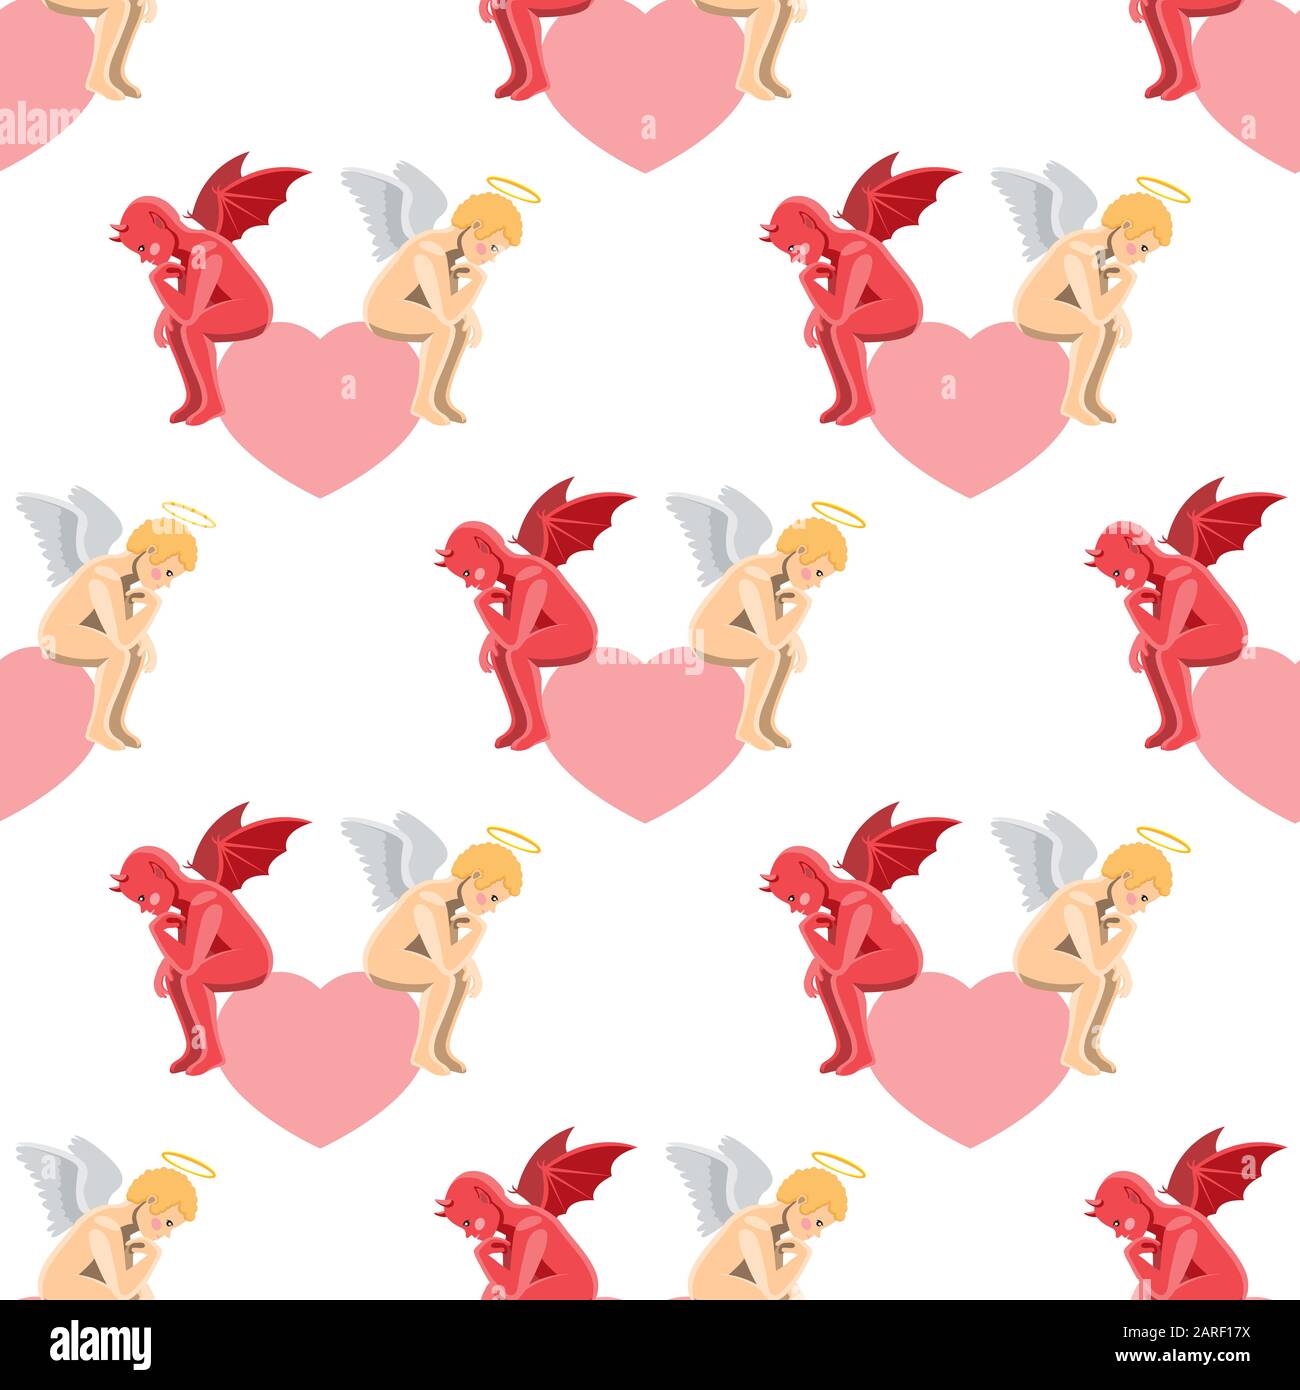 Seamless pattern of an angel demon sitting on a heart in a pensive pose on a white background. Vector image Stock Vector